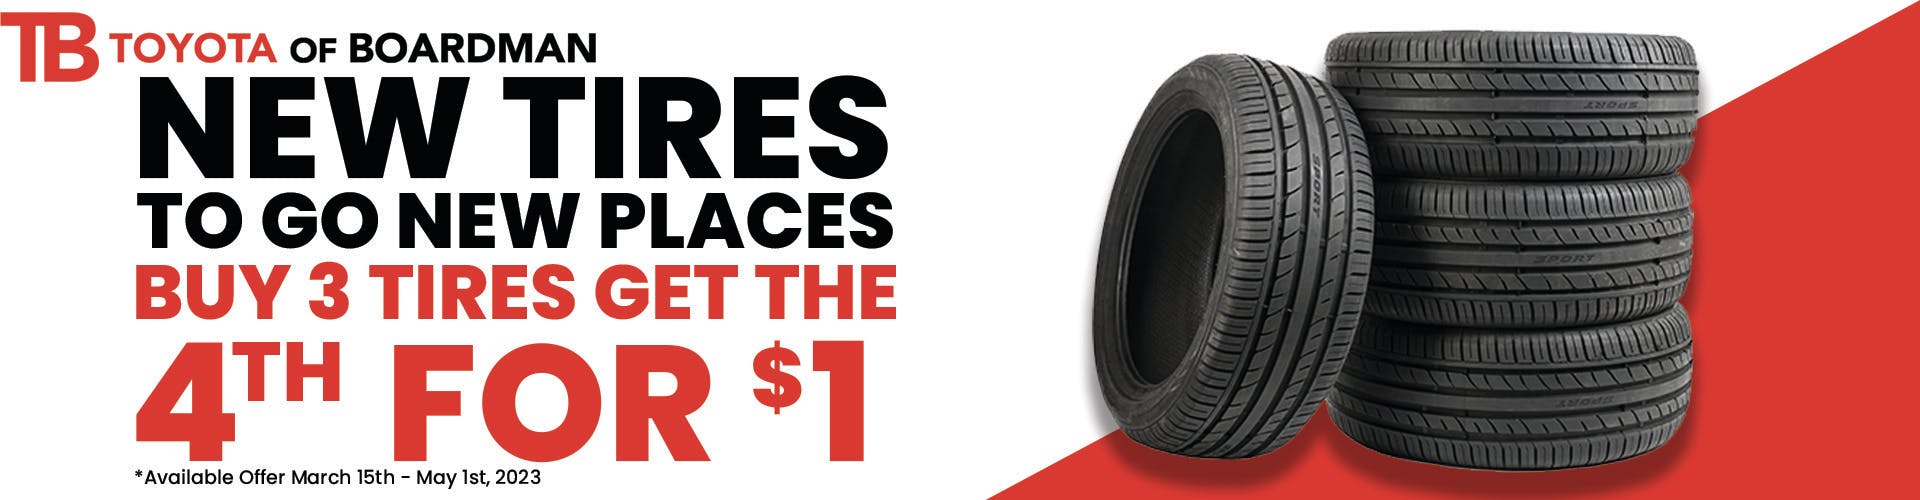 Buy 3 Get 1 for $1 Tires